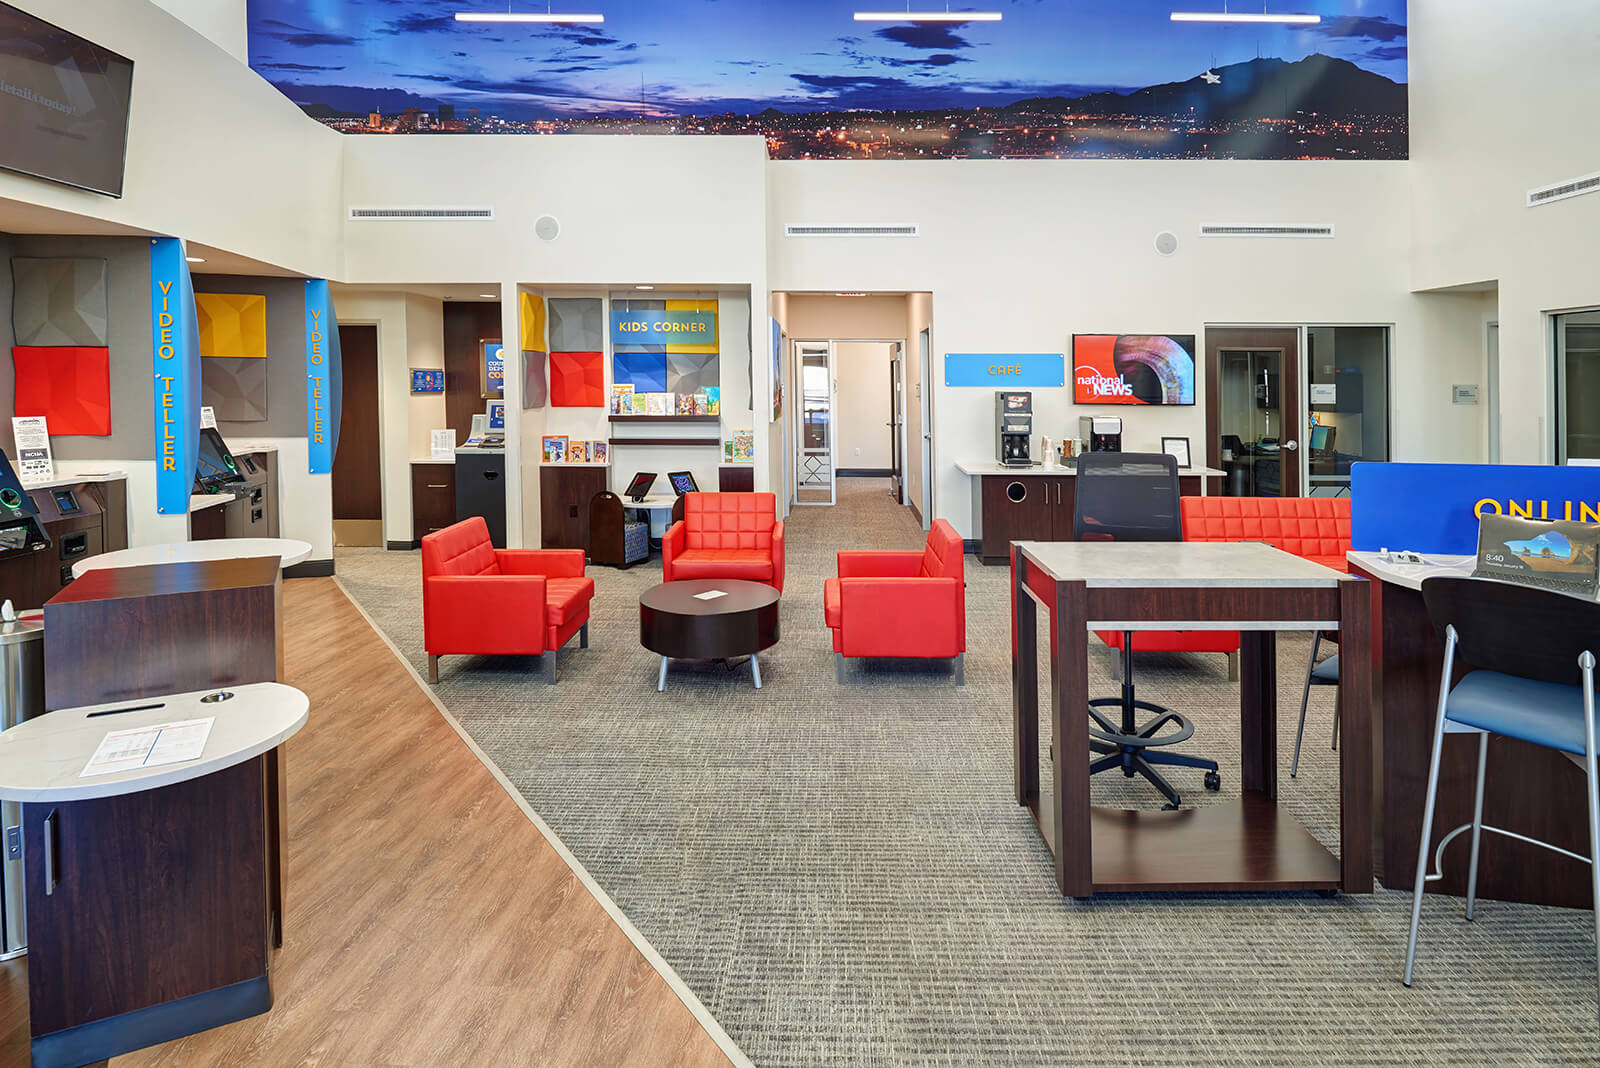 New credit union branch lounge